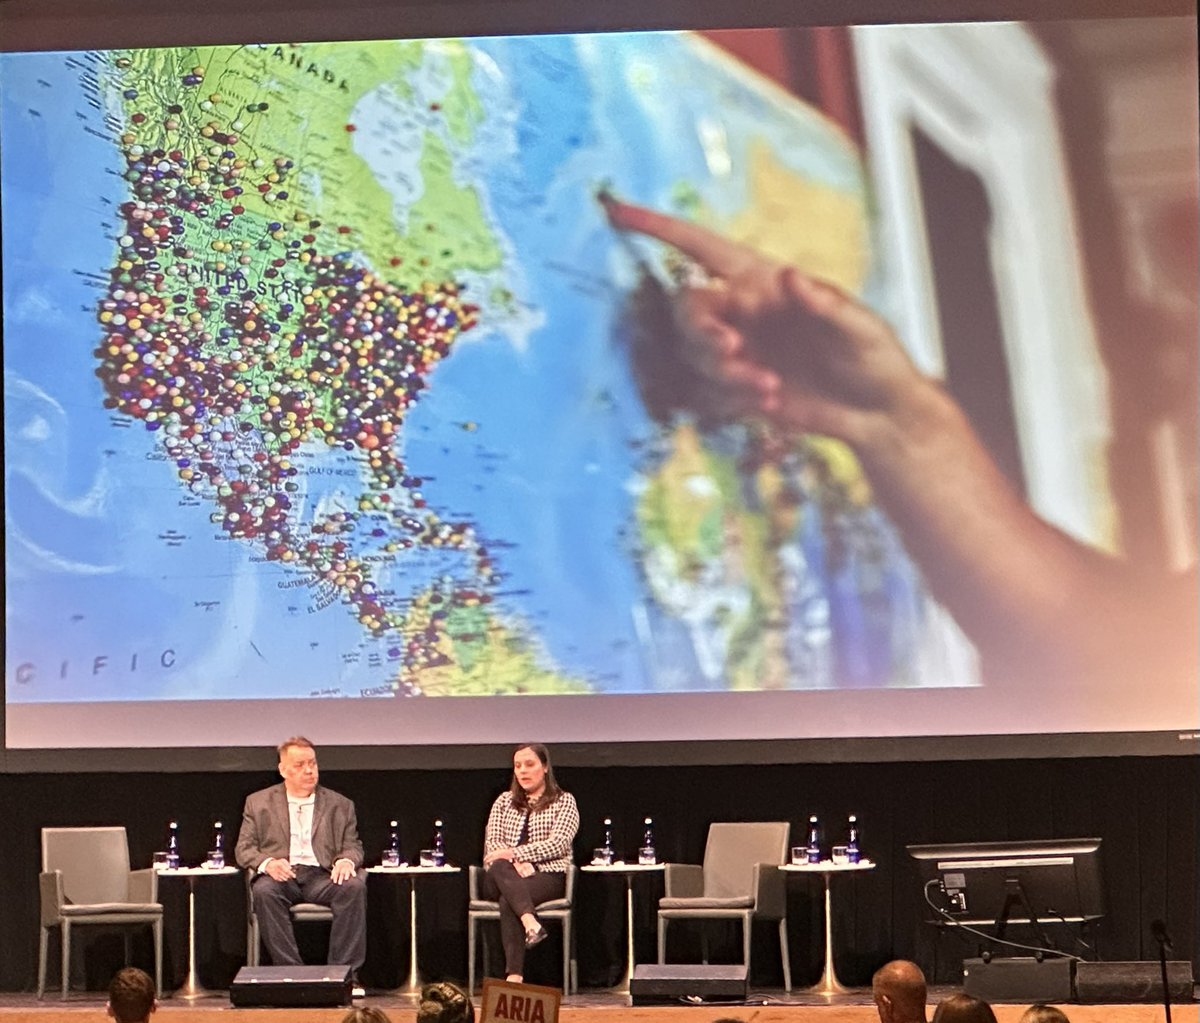 Geospatial insurance primer with @Todd_Effin_Barr and @briana_maps, we face a new period of climate unknowns, can AI help? @geography2050